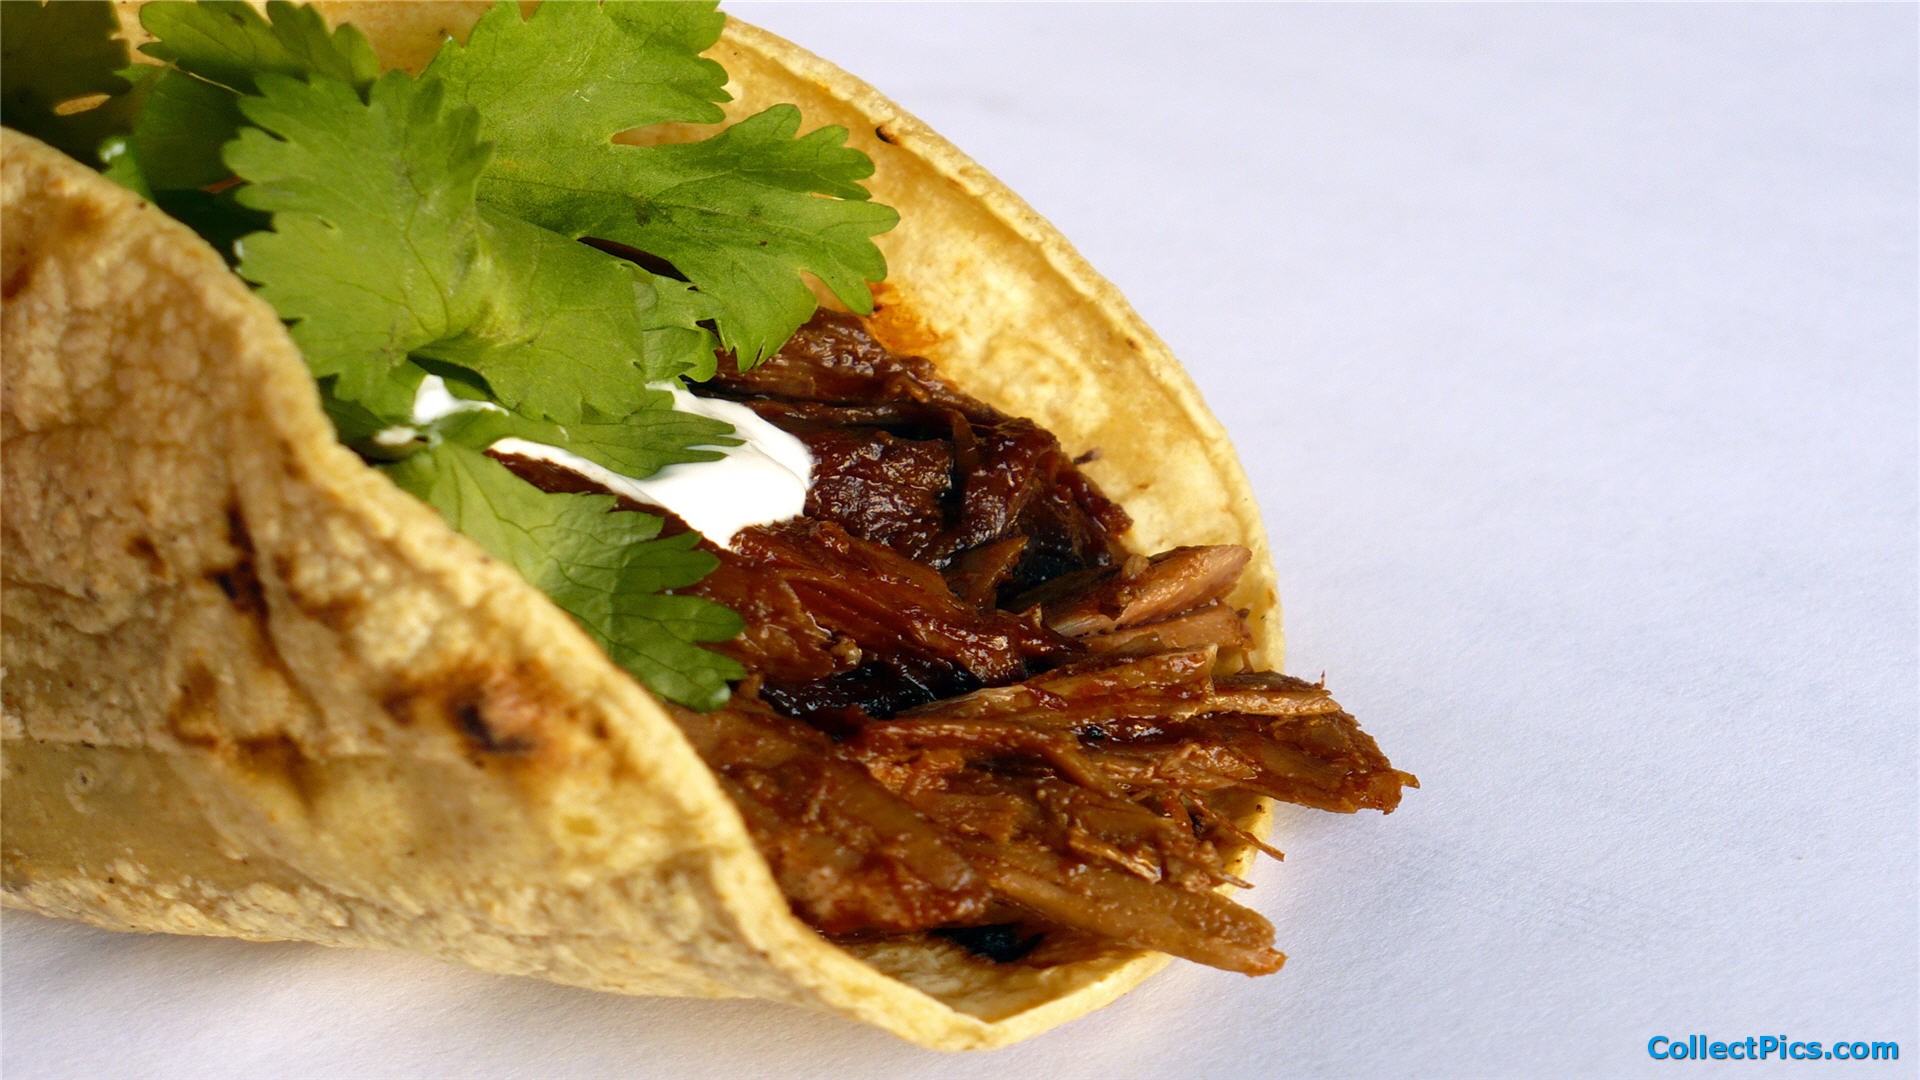 Related search Mexican Food Tacos 1920x1080 Foods